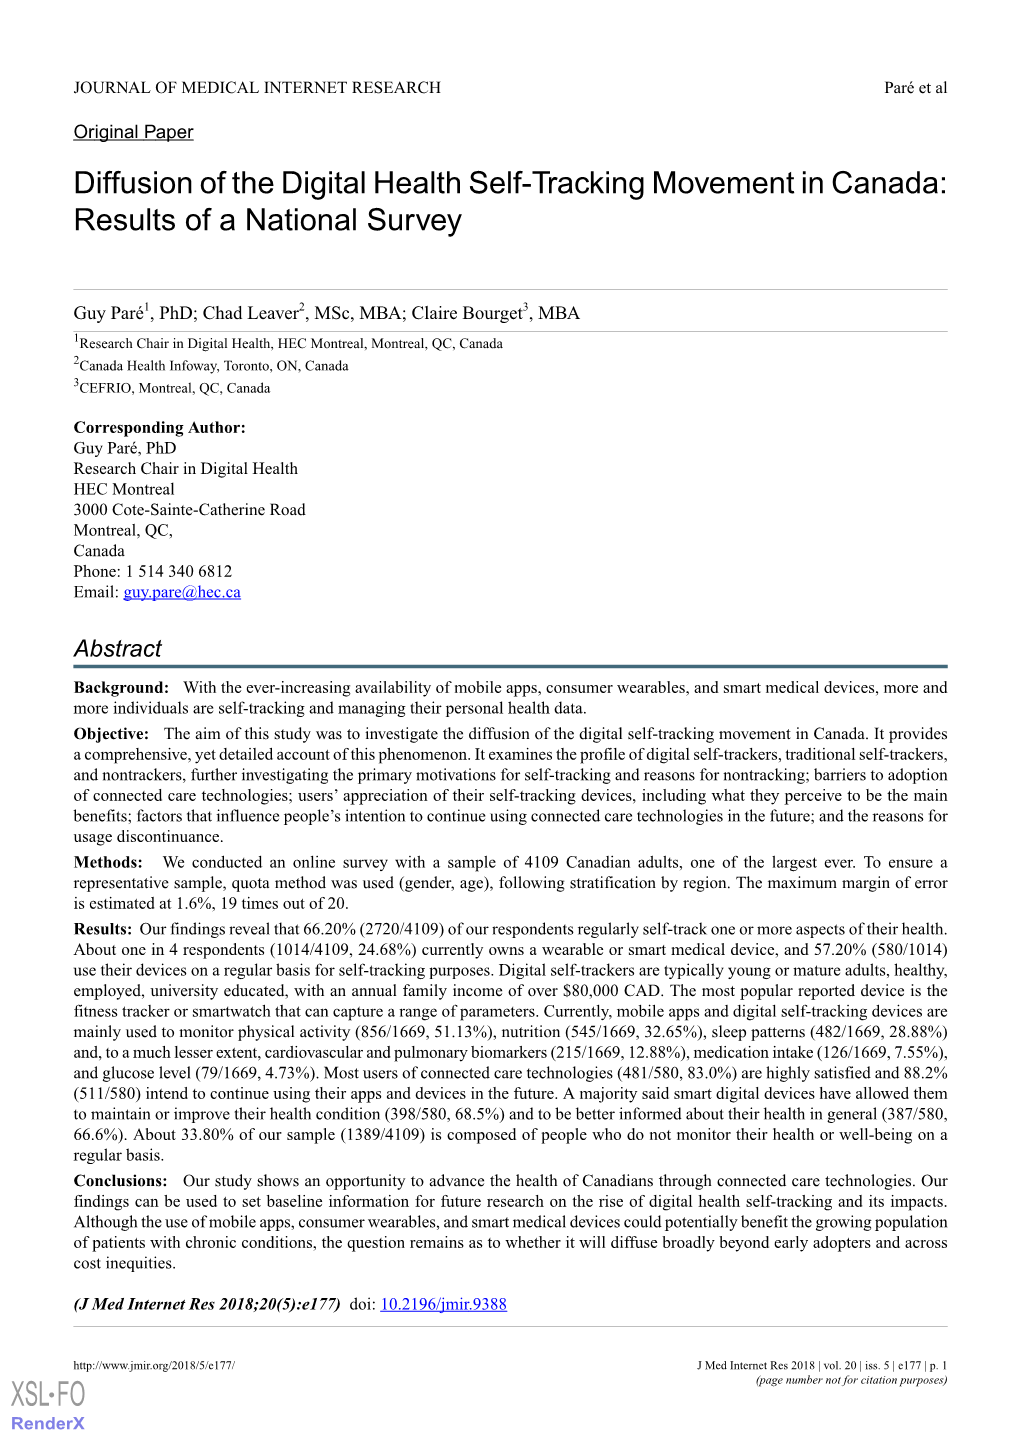 Diffusion of the Digital Health Self-Tracking Movement in Canada: Results of a National Survey